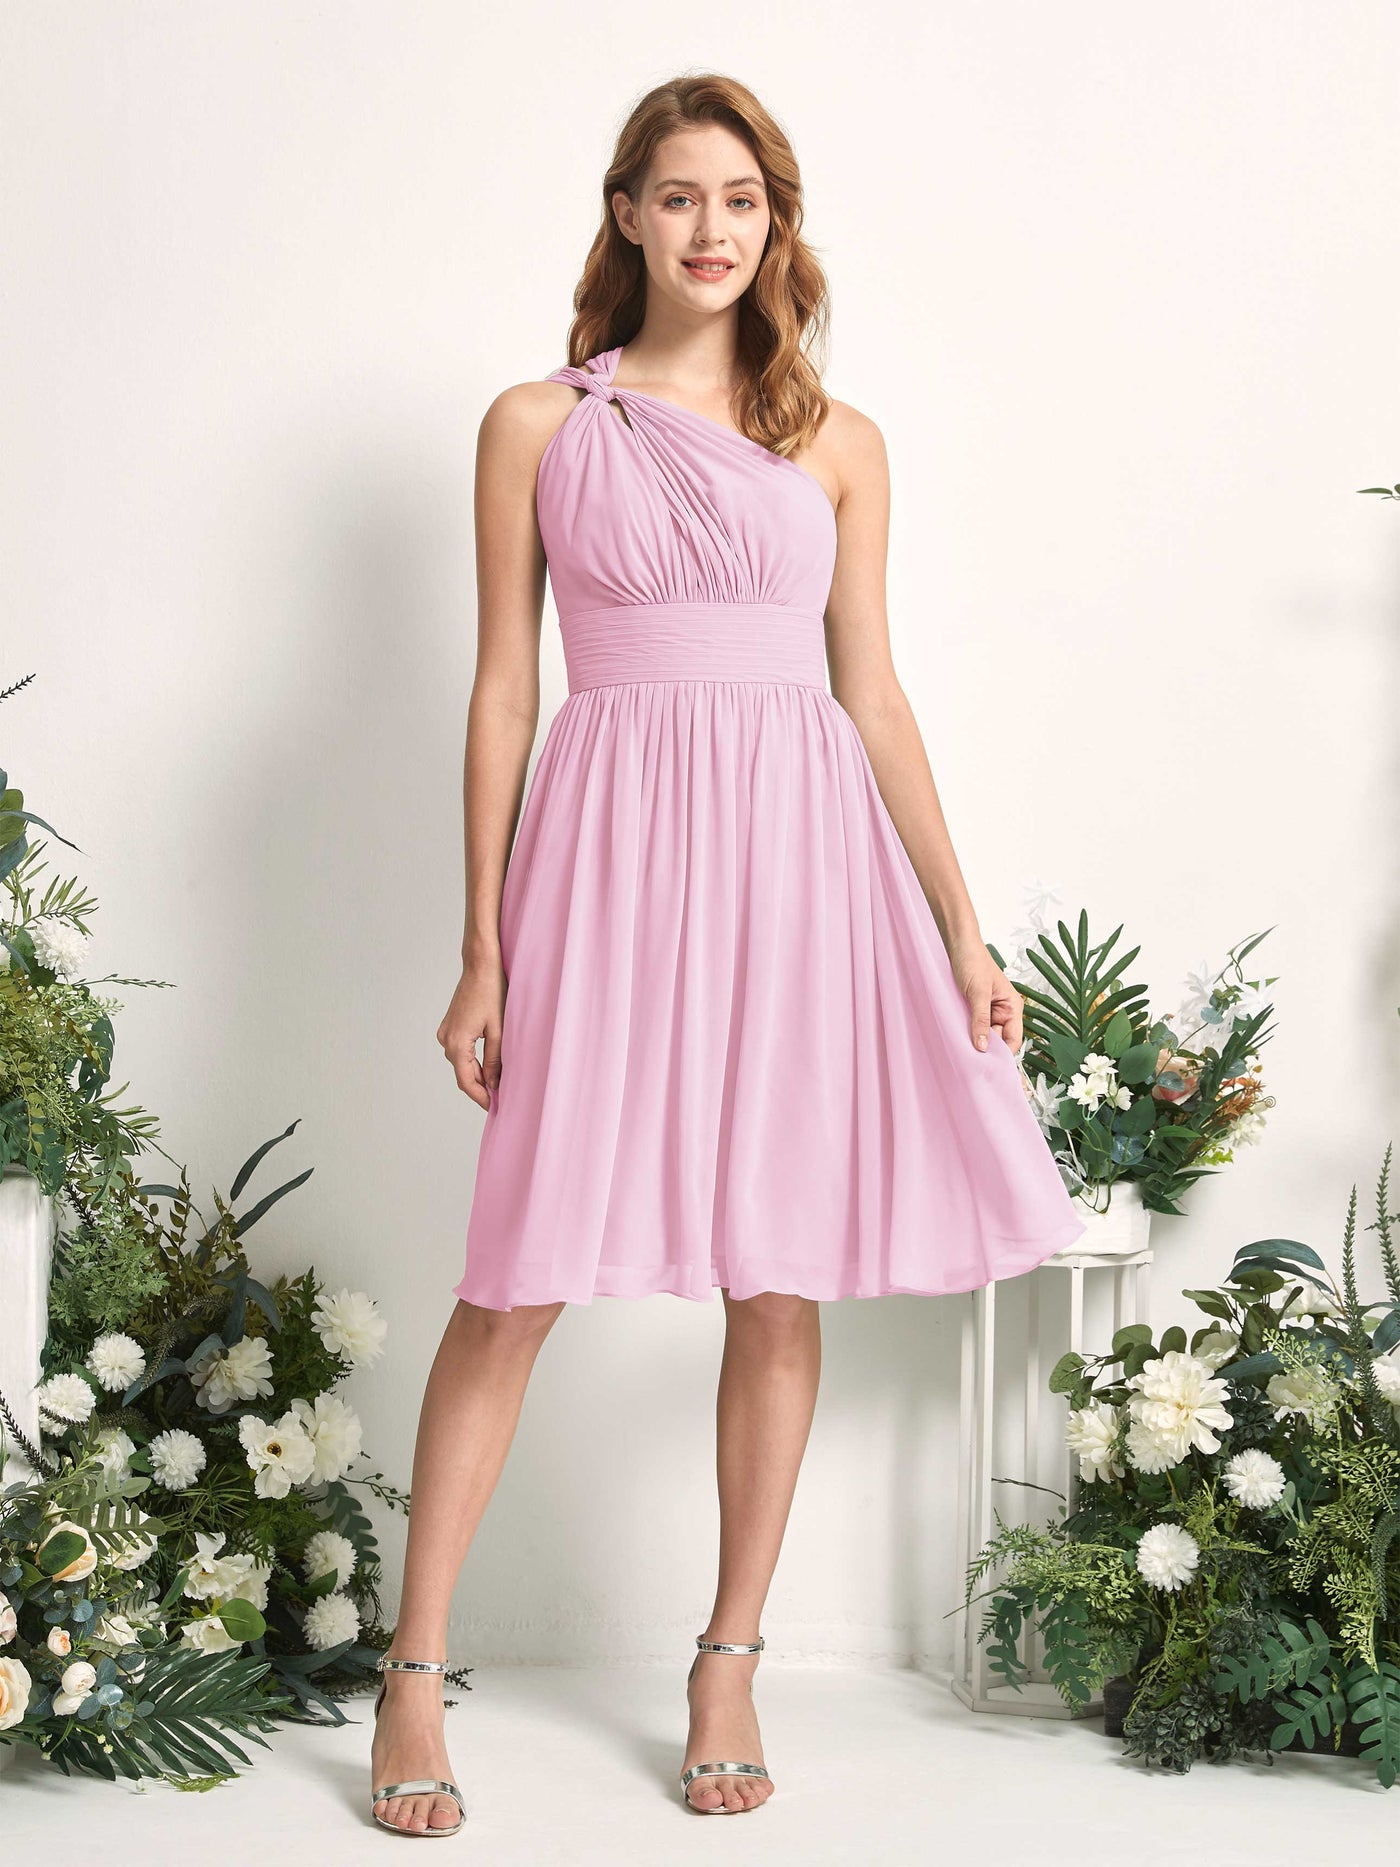 Bridesmaid Dress A-line Chiffon One Shoulder Knee Length Sleeveless Wedding Party Dress - Candy Pink (81221239)#color_candy-pink